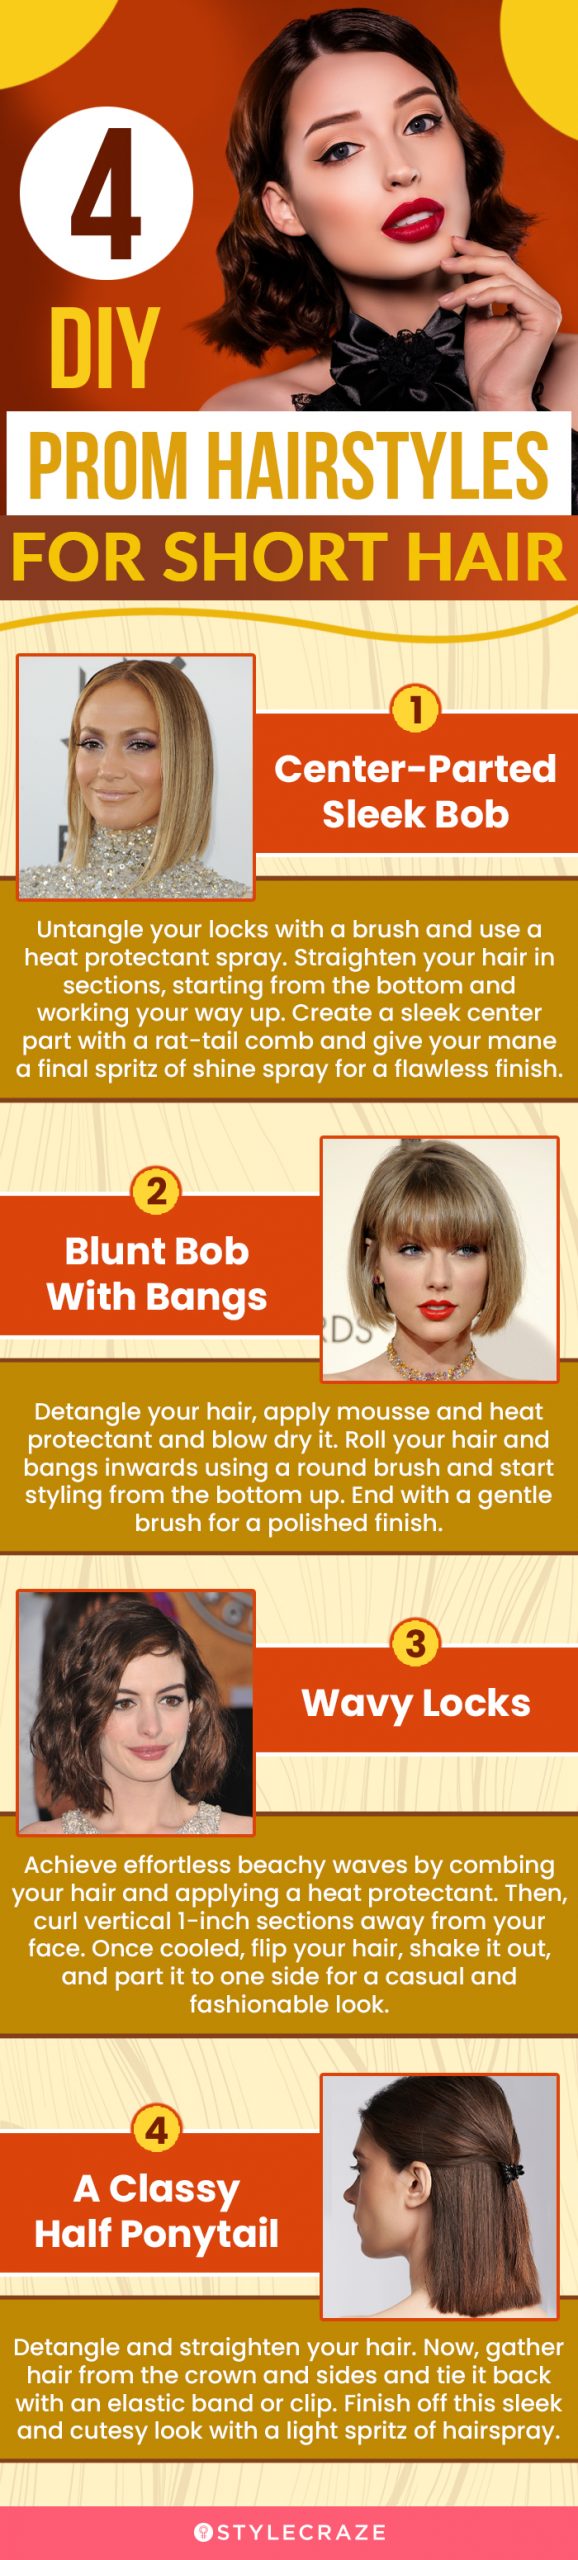 4 diy prom hairstyles for short hair (infographic)